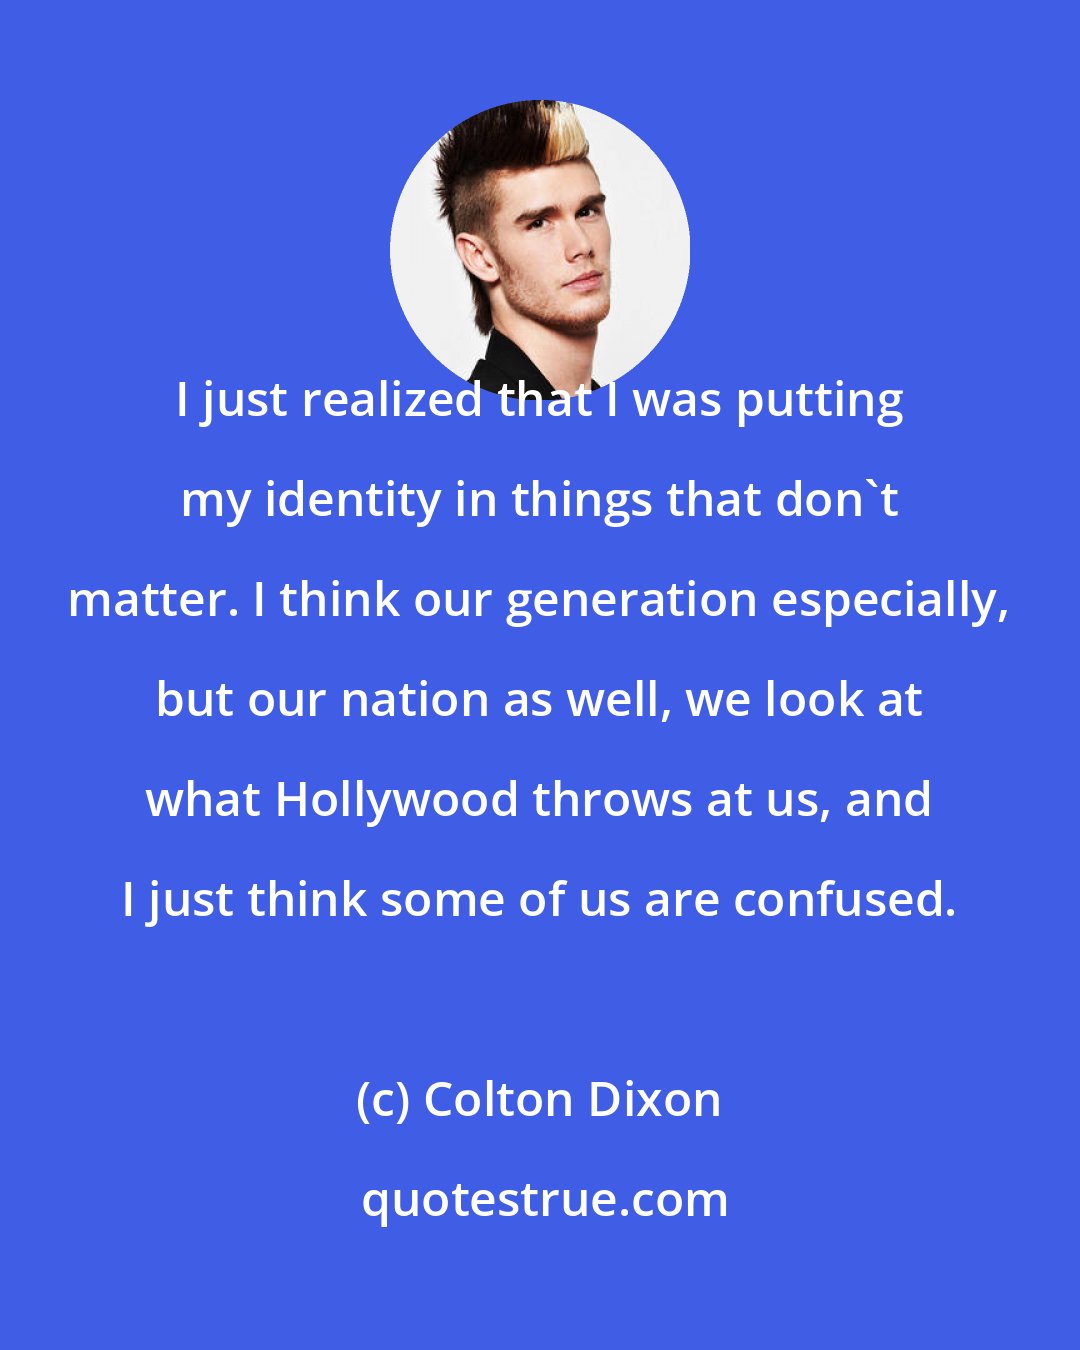 Colton Dixon: I just realized that I was putting my identity in things that don't matter. I think our generation especially, but our nation as well, we look at what Hollywood throws at us, and I just think some of us are confused.